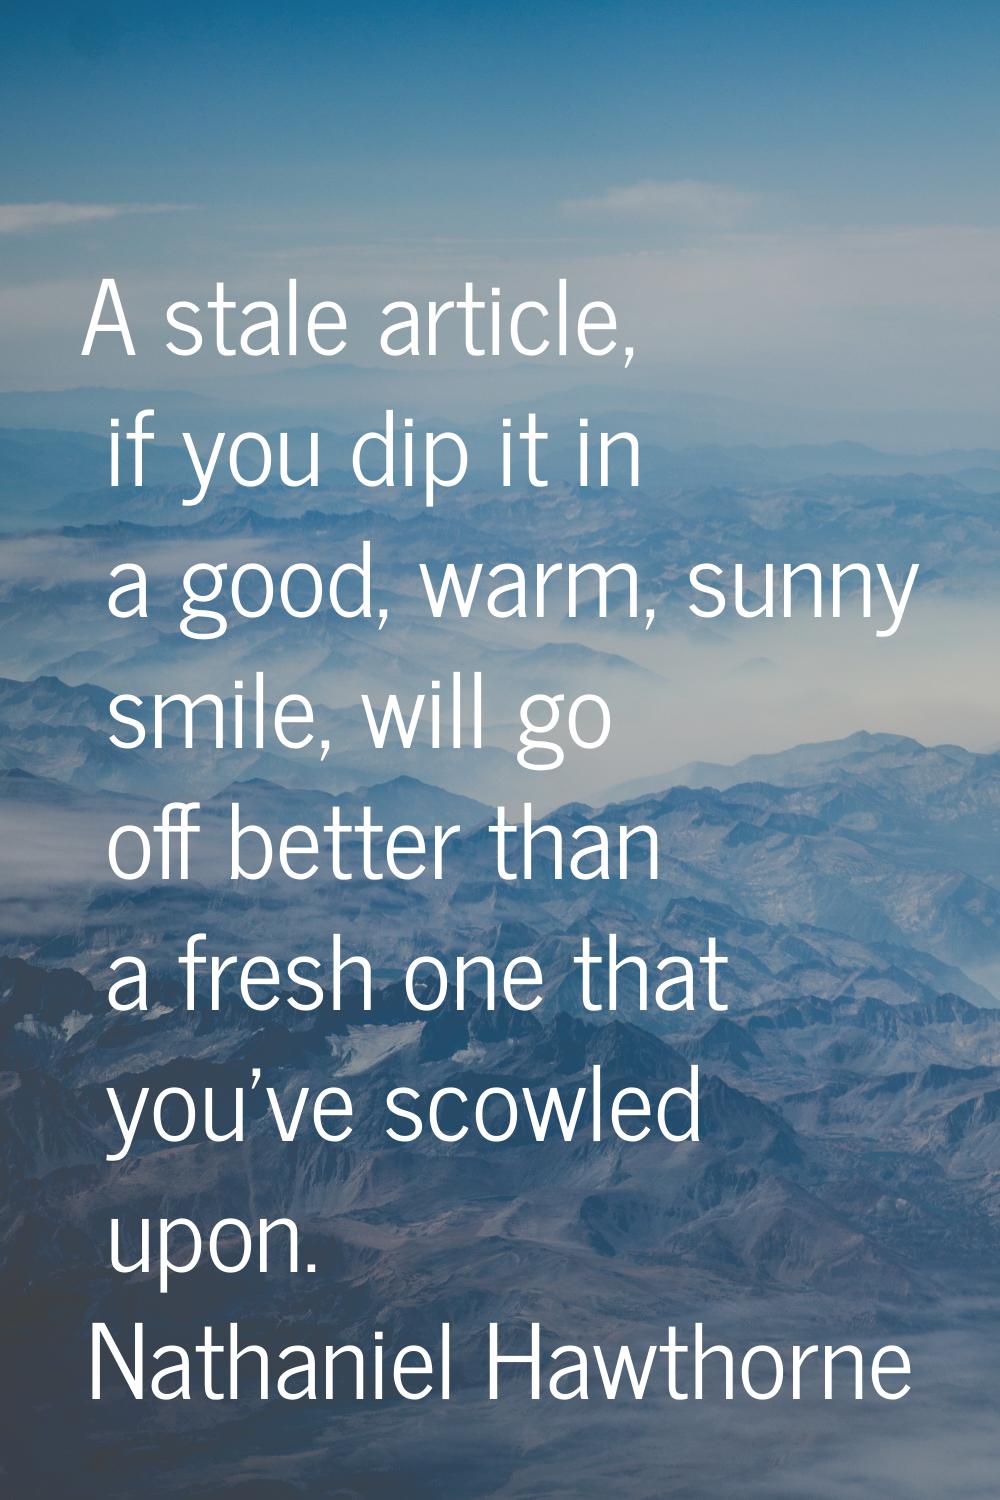 A stale article, if you dip it in a good, warm, sunny smile, will go off better than a fresh one th